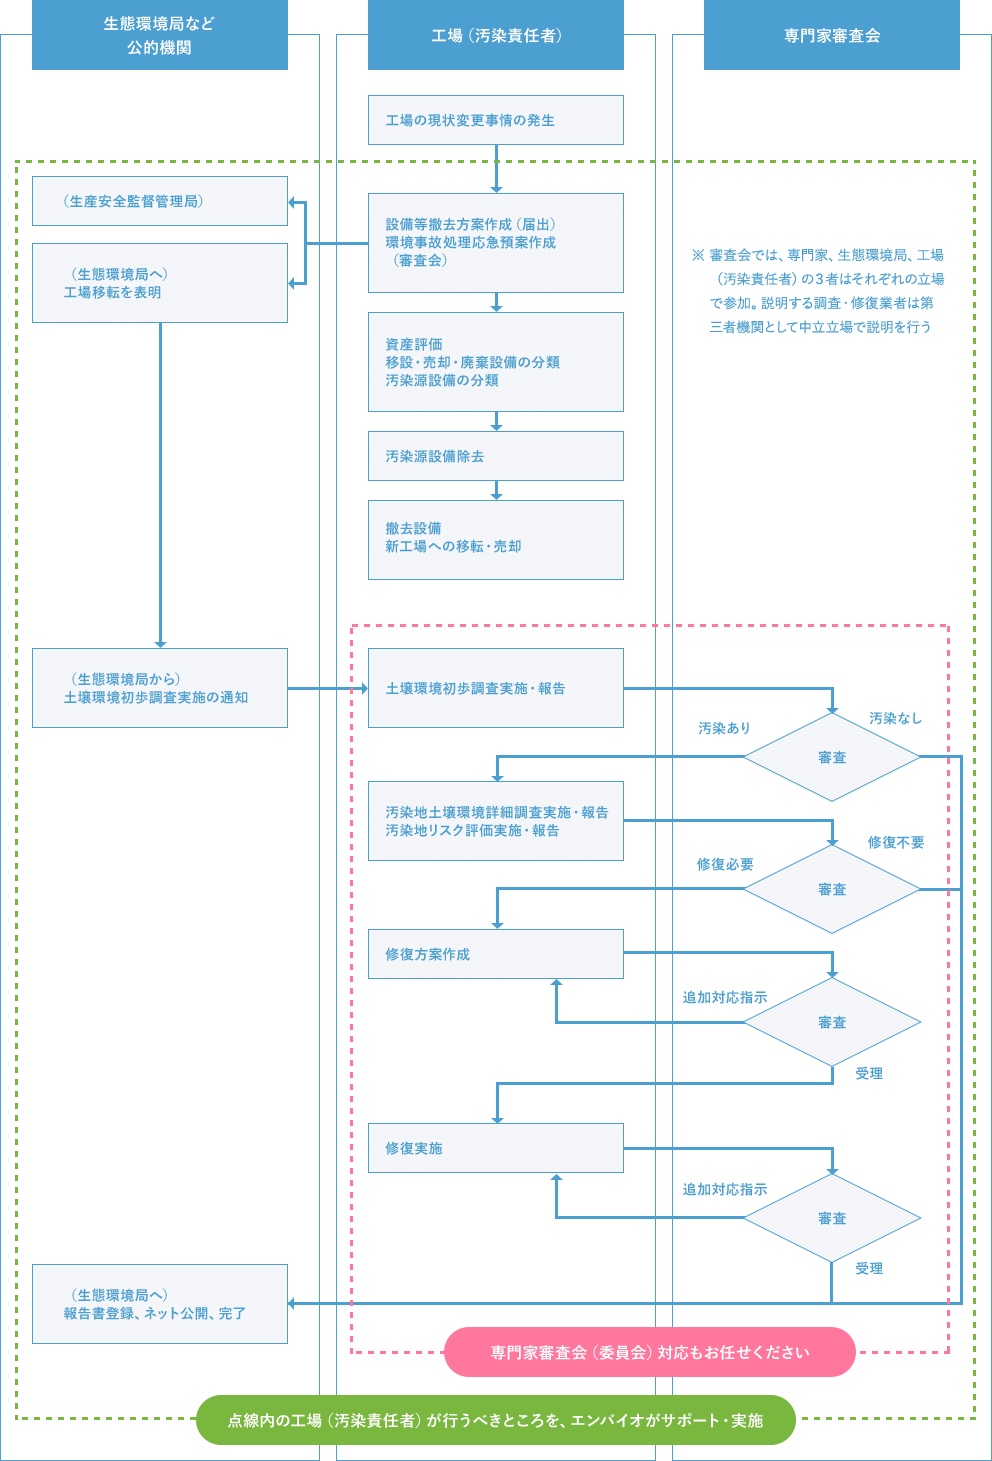 Workflow of the examination approval (written in Japanese)